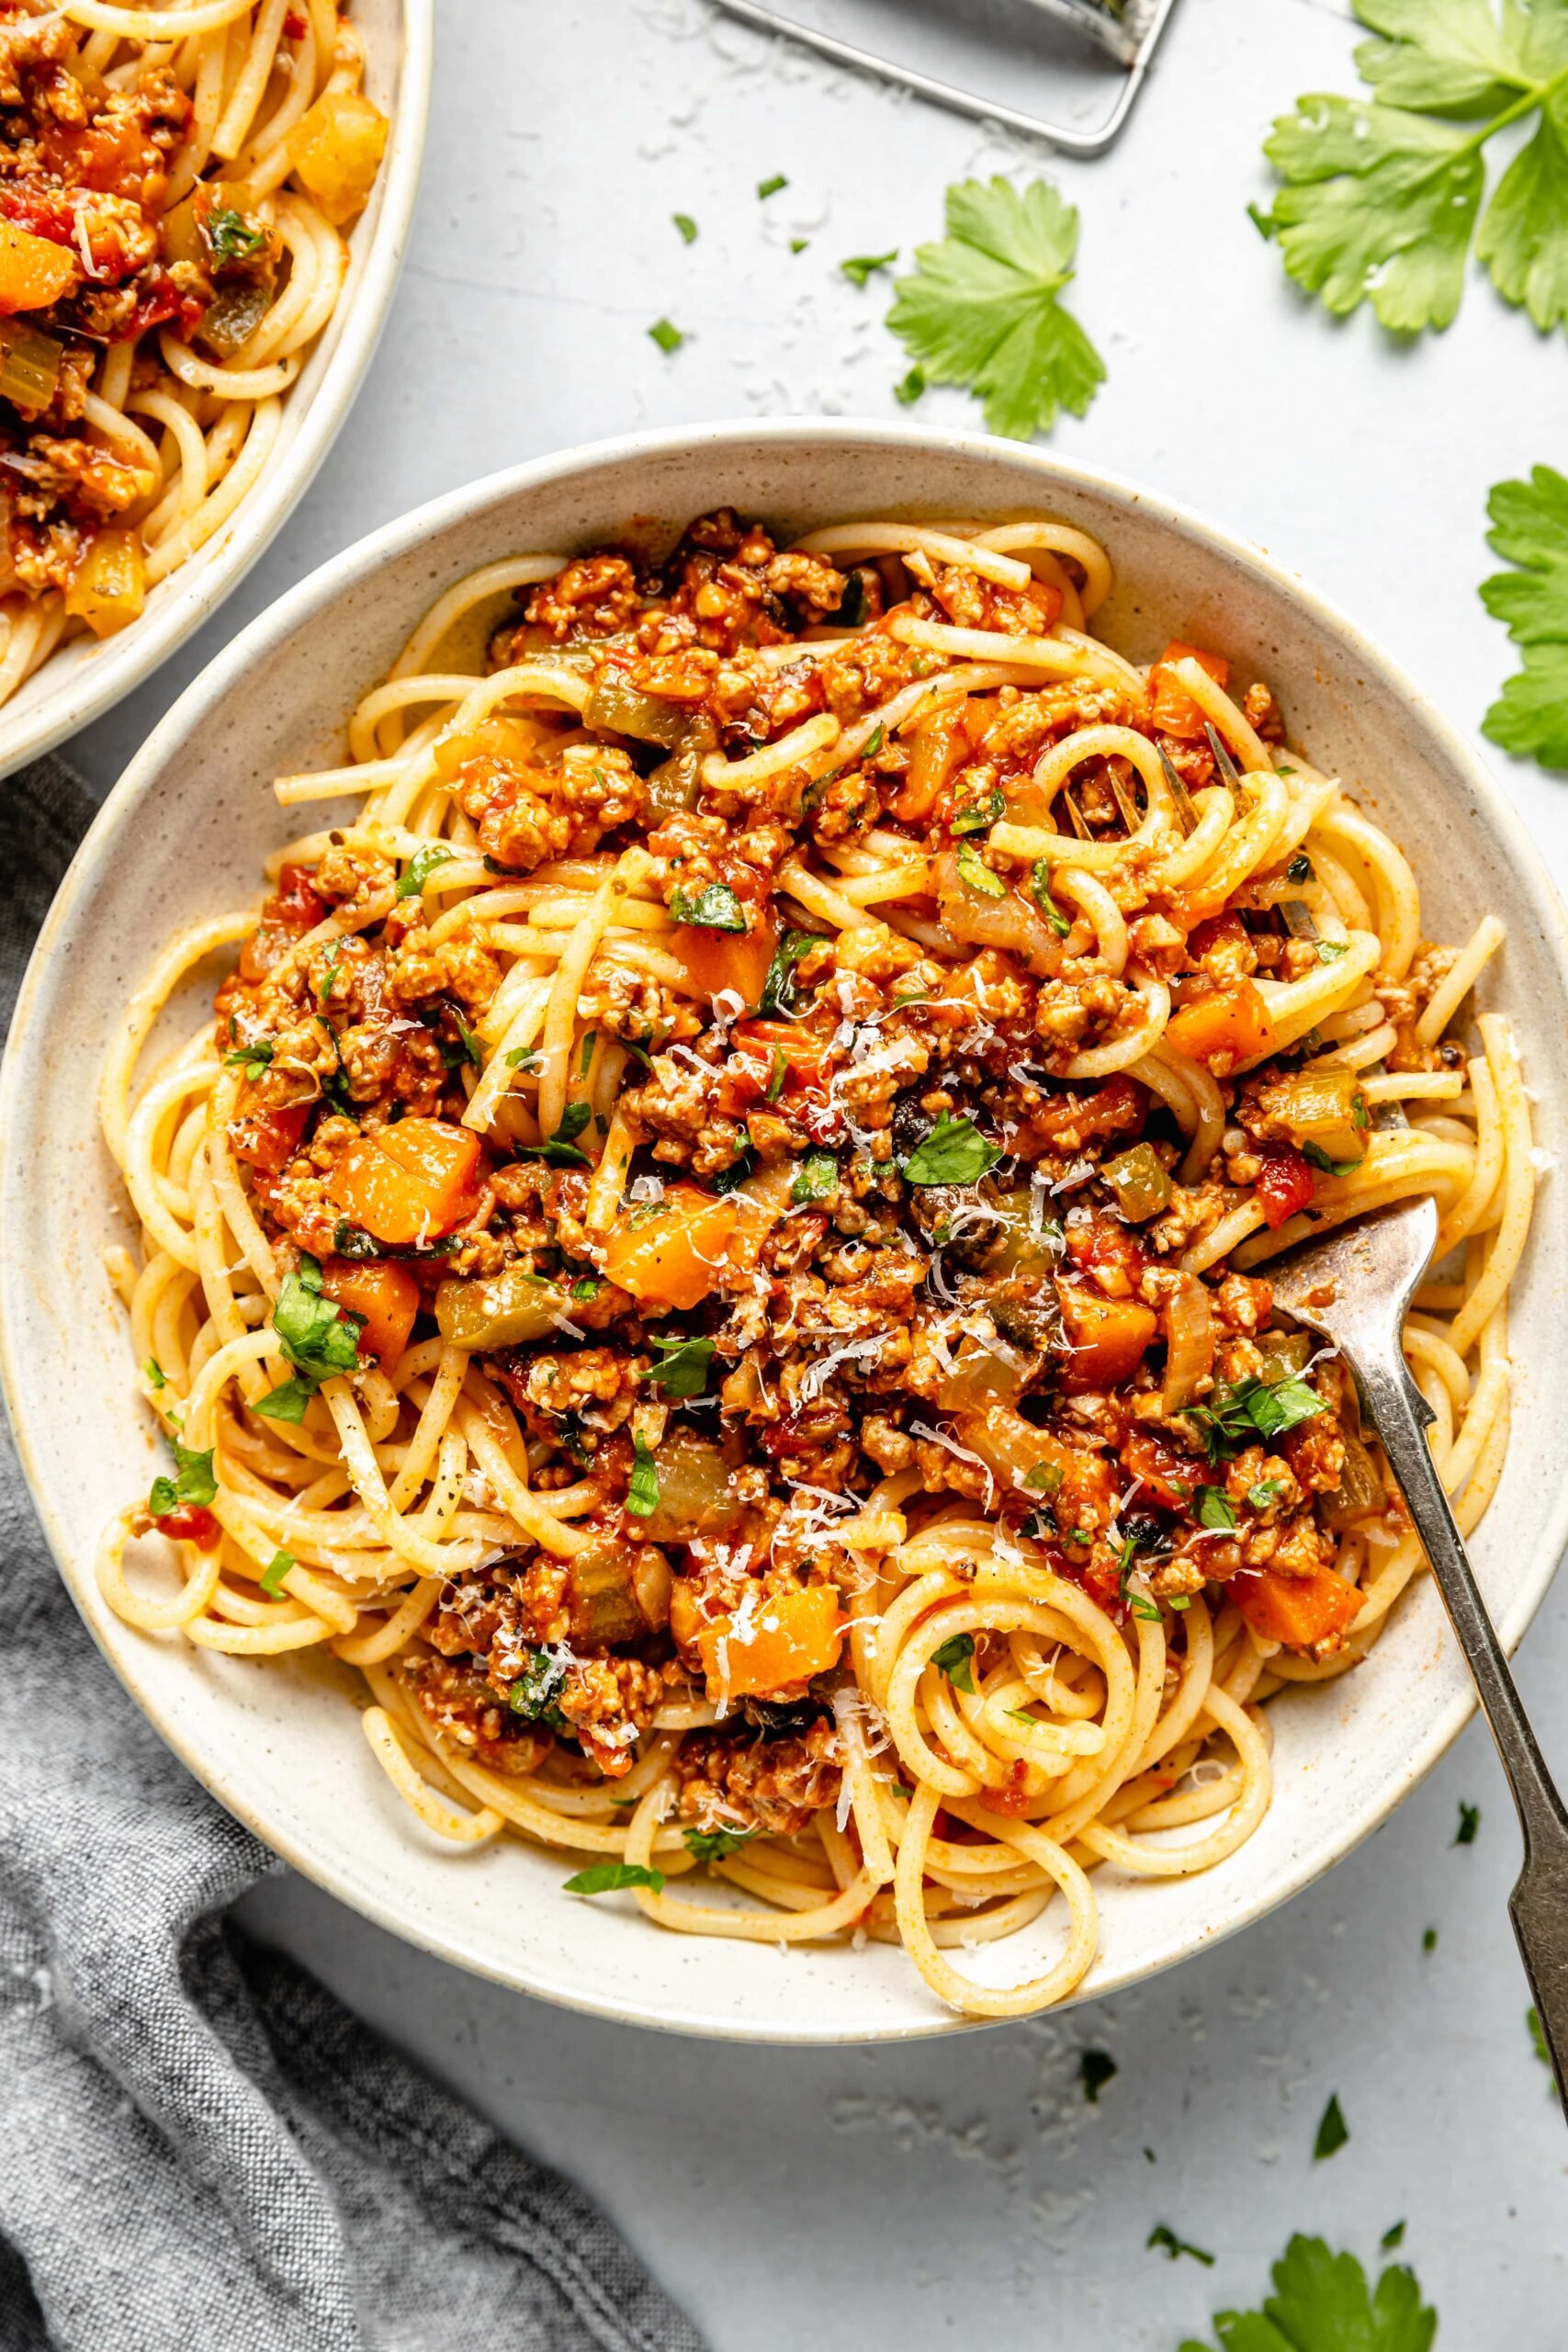 bolognese sauce over pasta